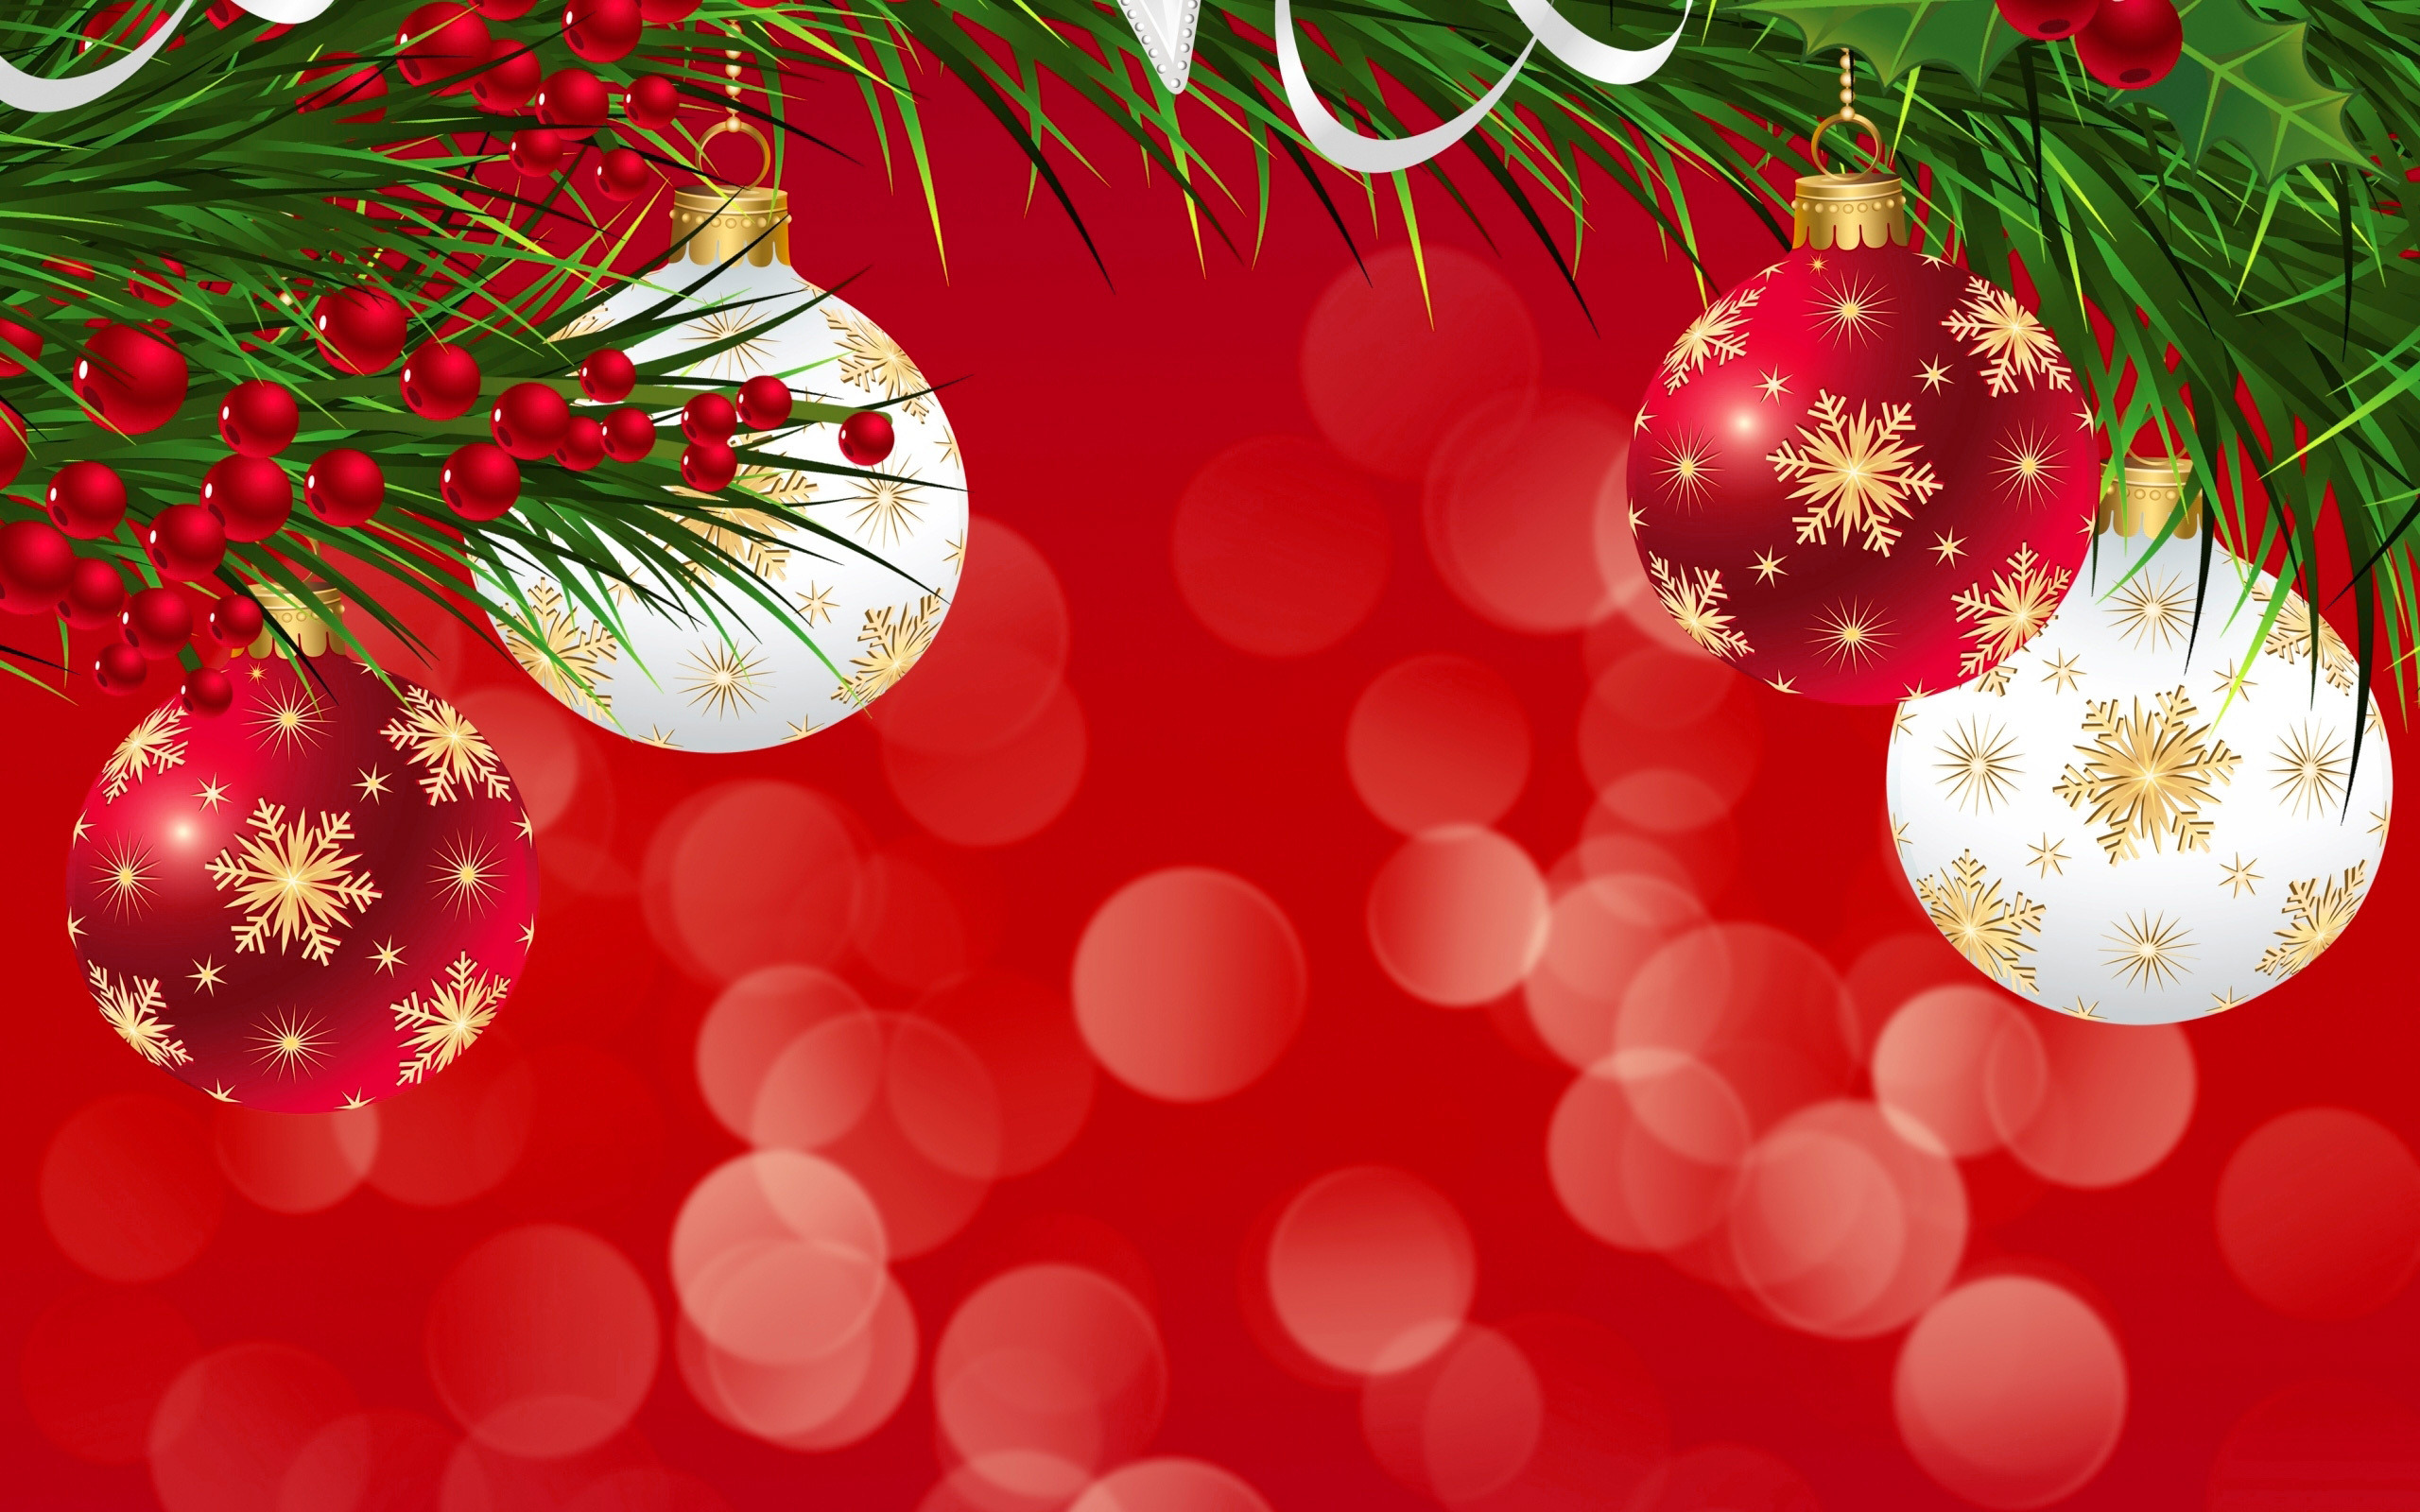 Red_Christmas_Background_with_Ornaments.jpg?m=1399676400